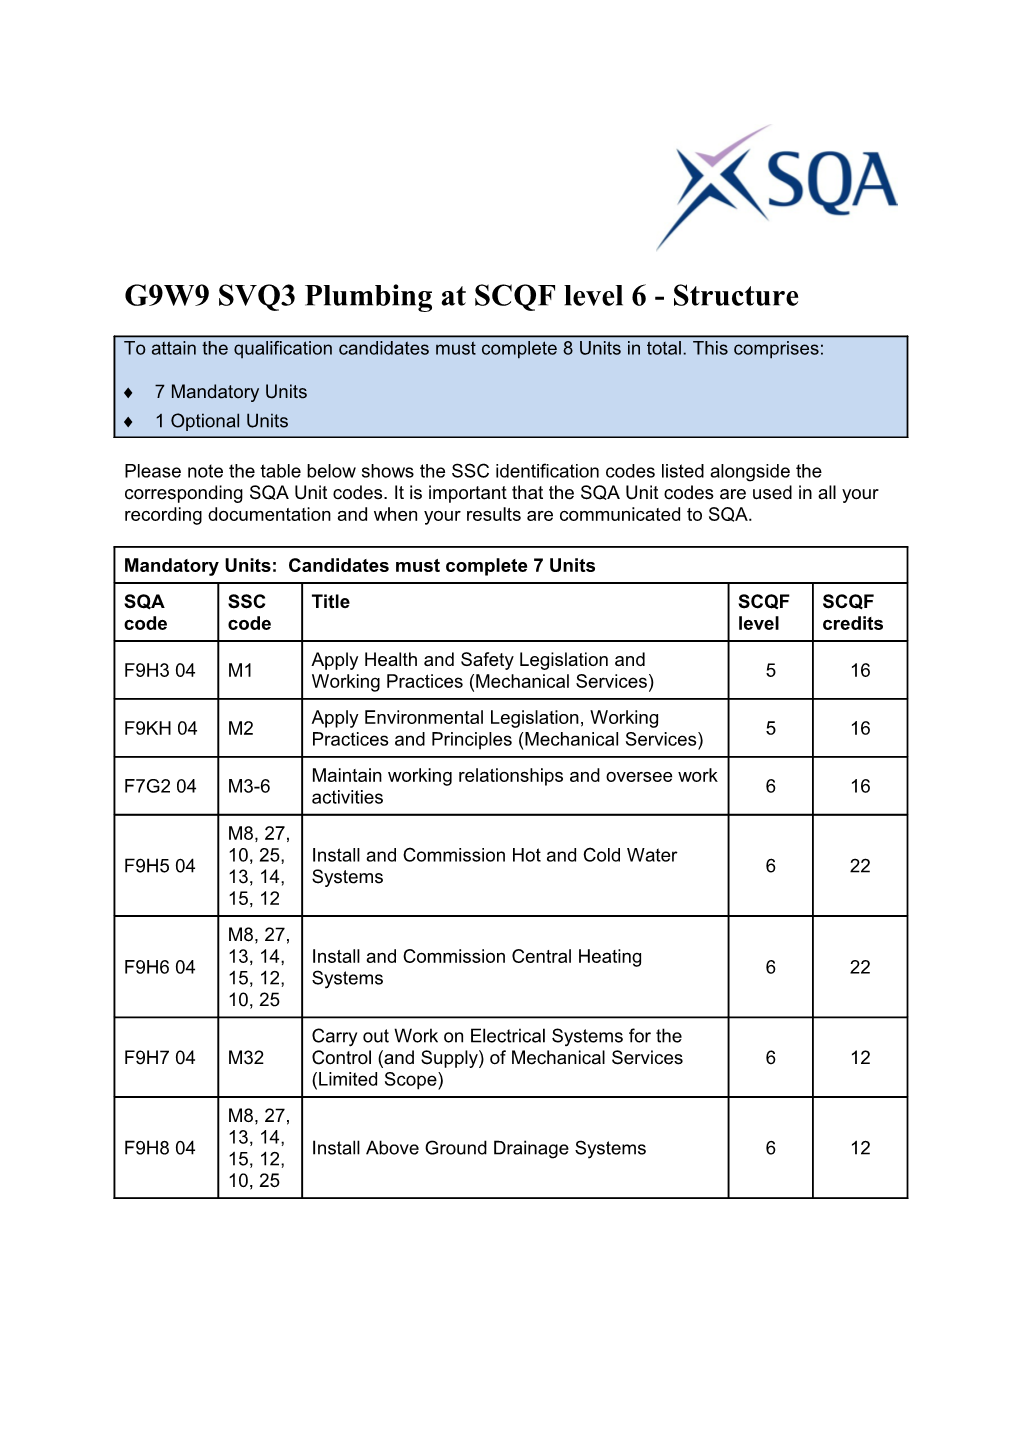 G9W9 SVQ3 Plumbing at SCQF Level 6 - Structure